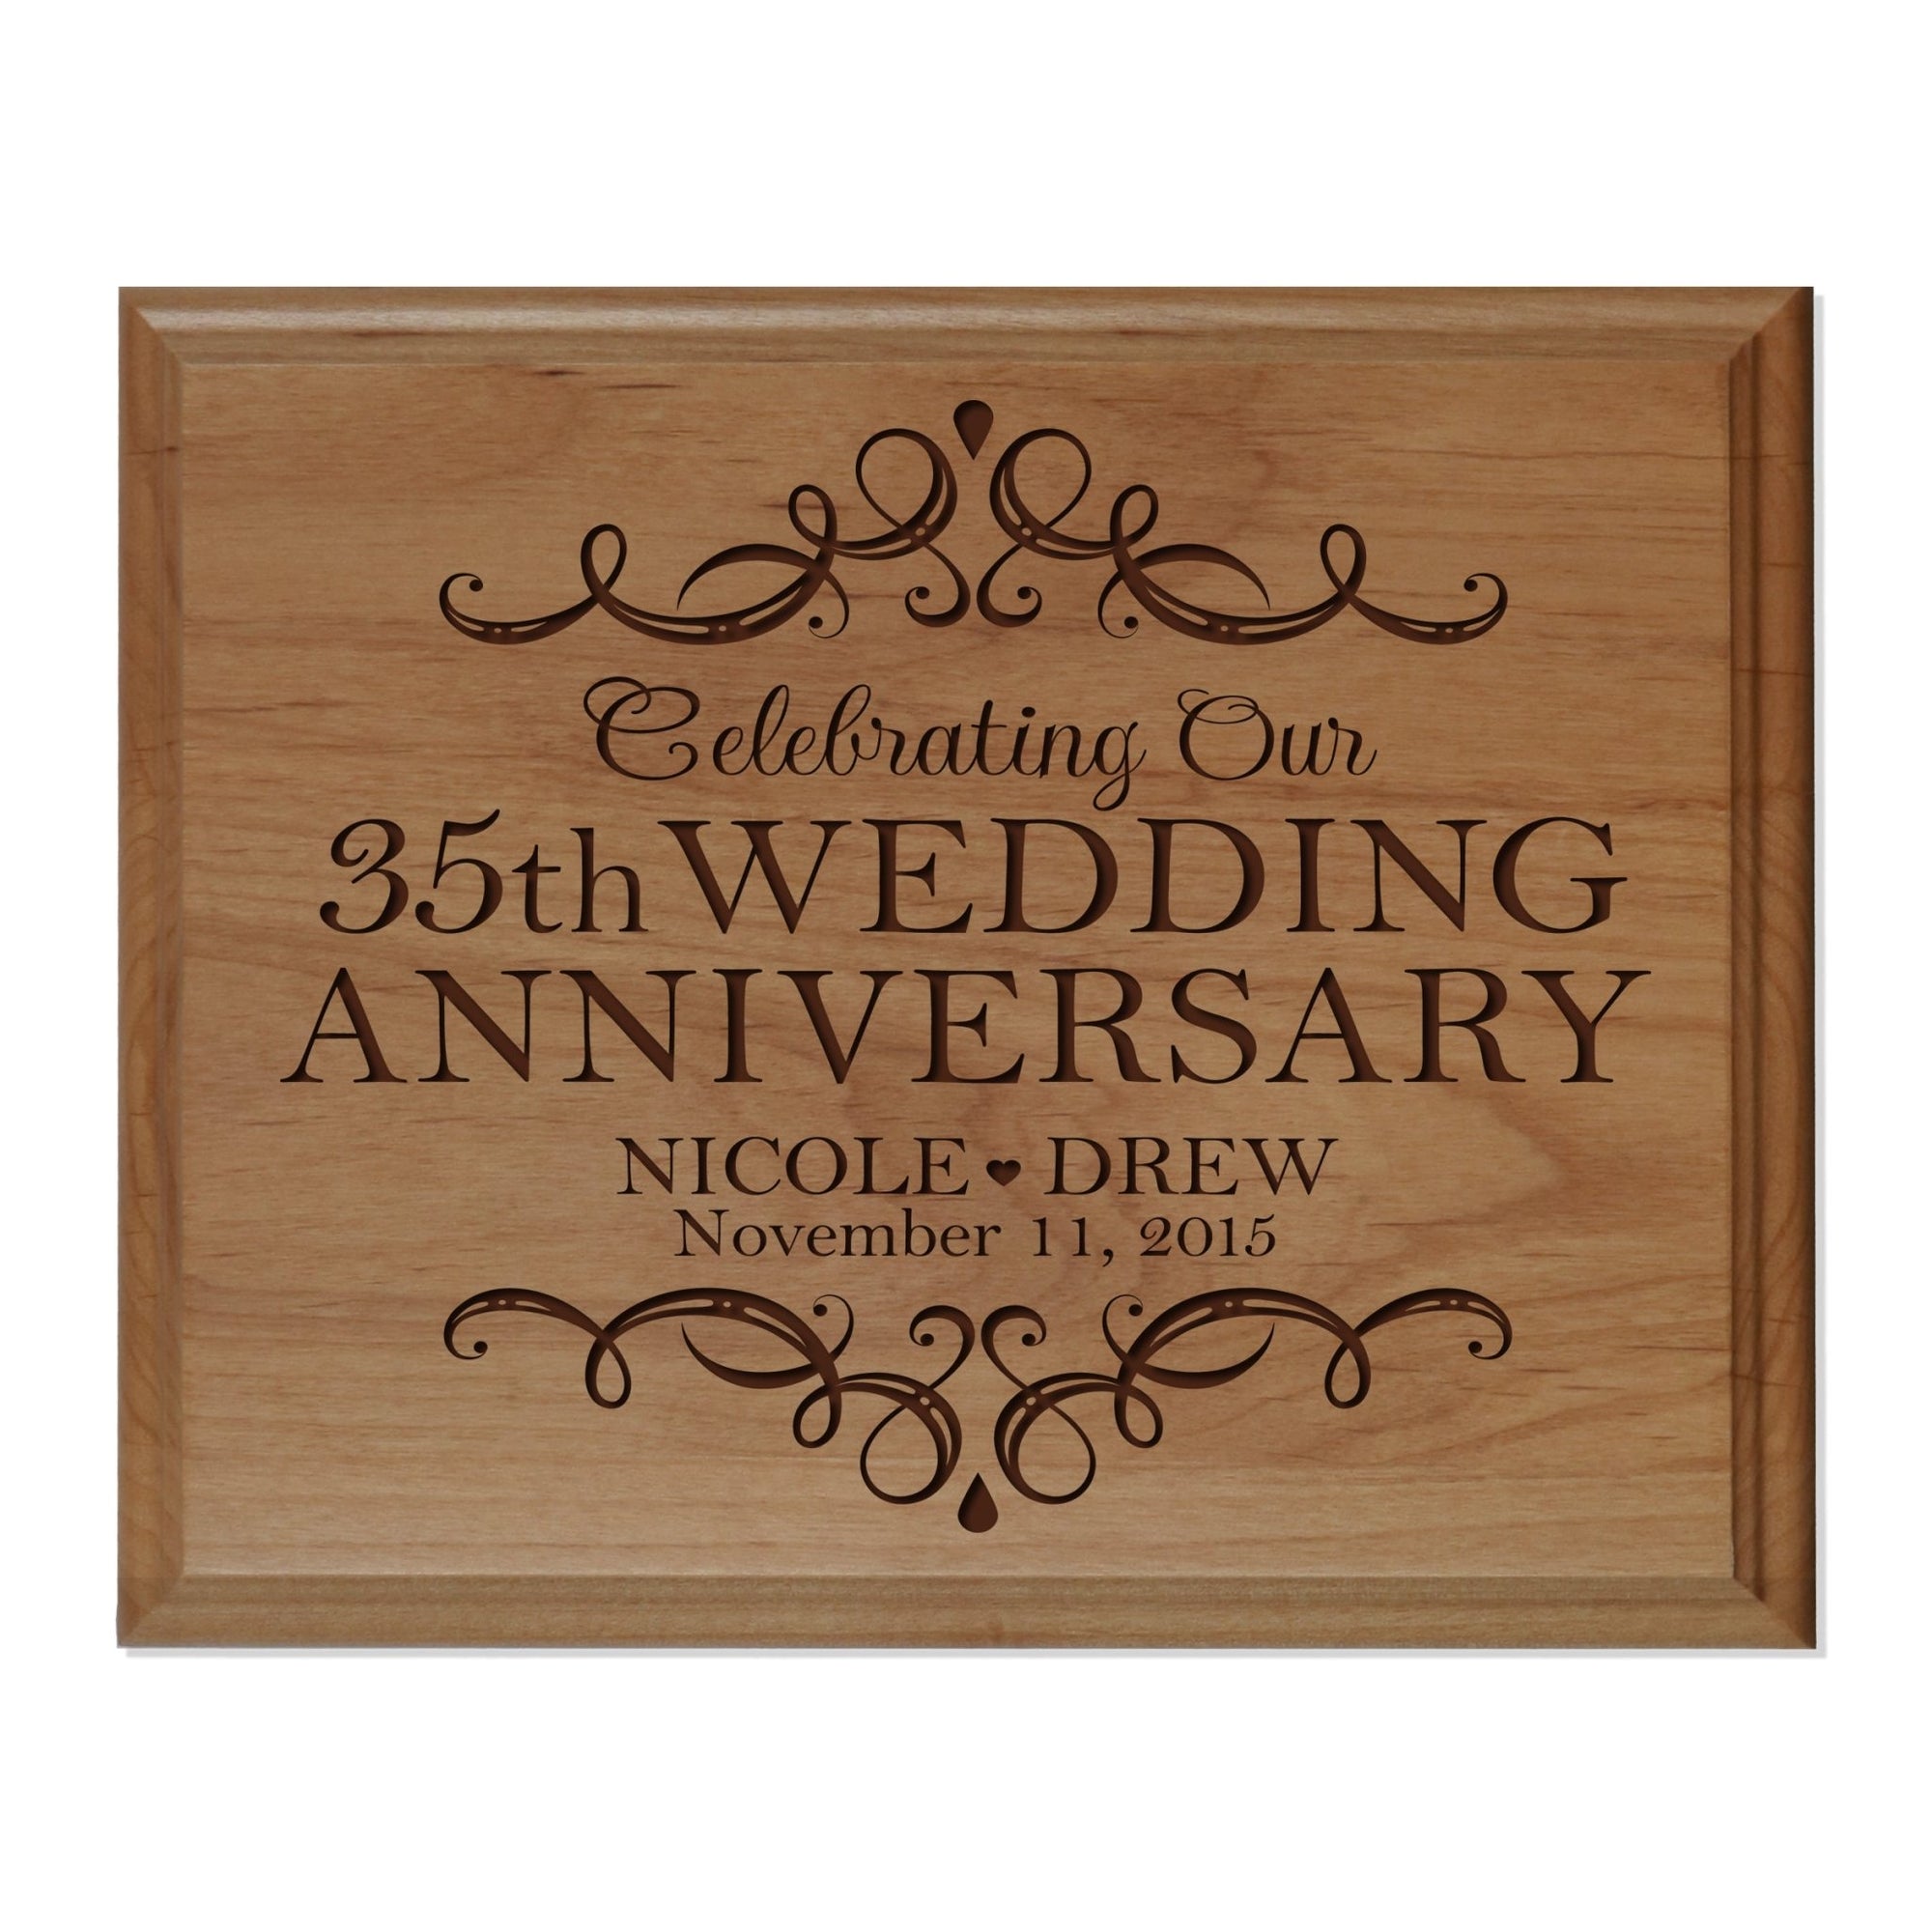 Personalized Anniversary Plaque - Celebrating Our Wedding Anniversary - LifeSong Milestones